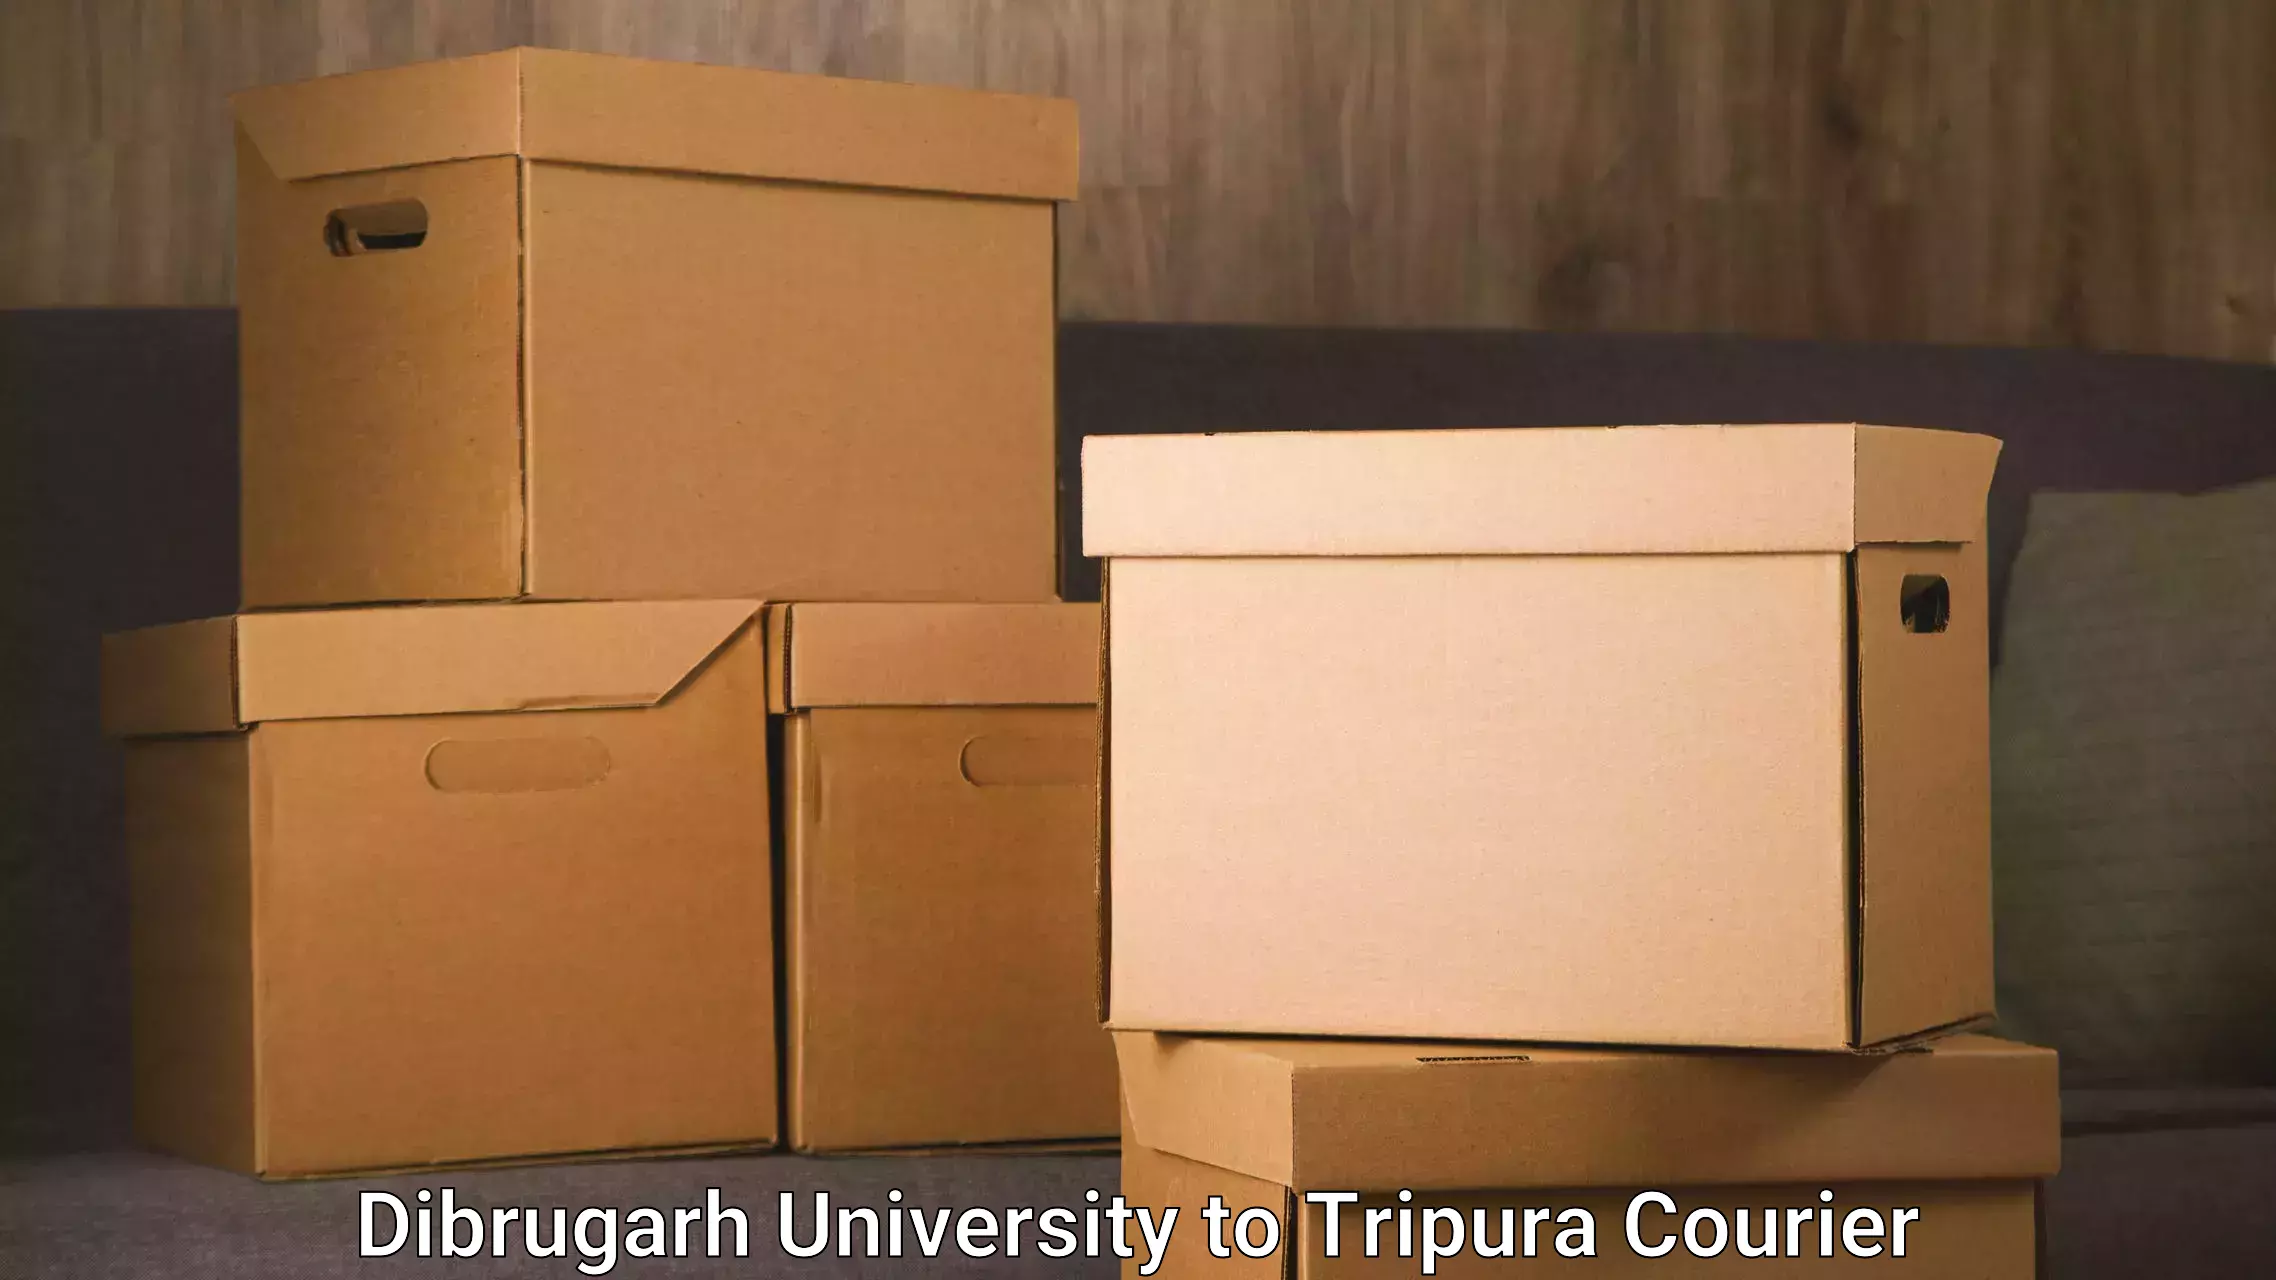 Efficient courier operations Dibrugarh University to Udaipur Tripura